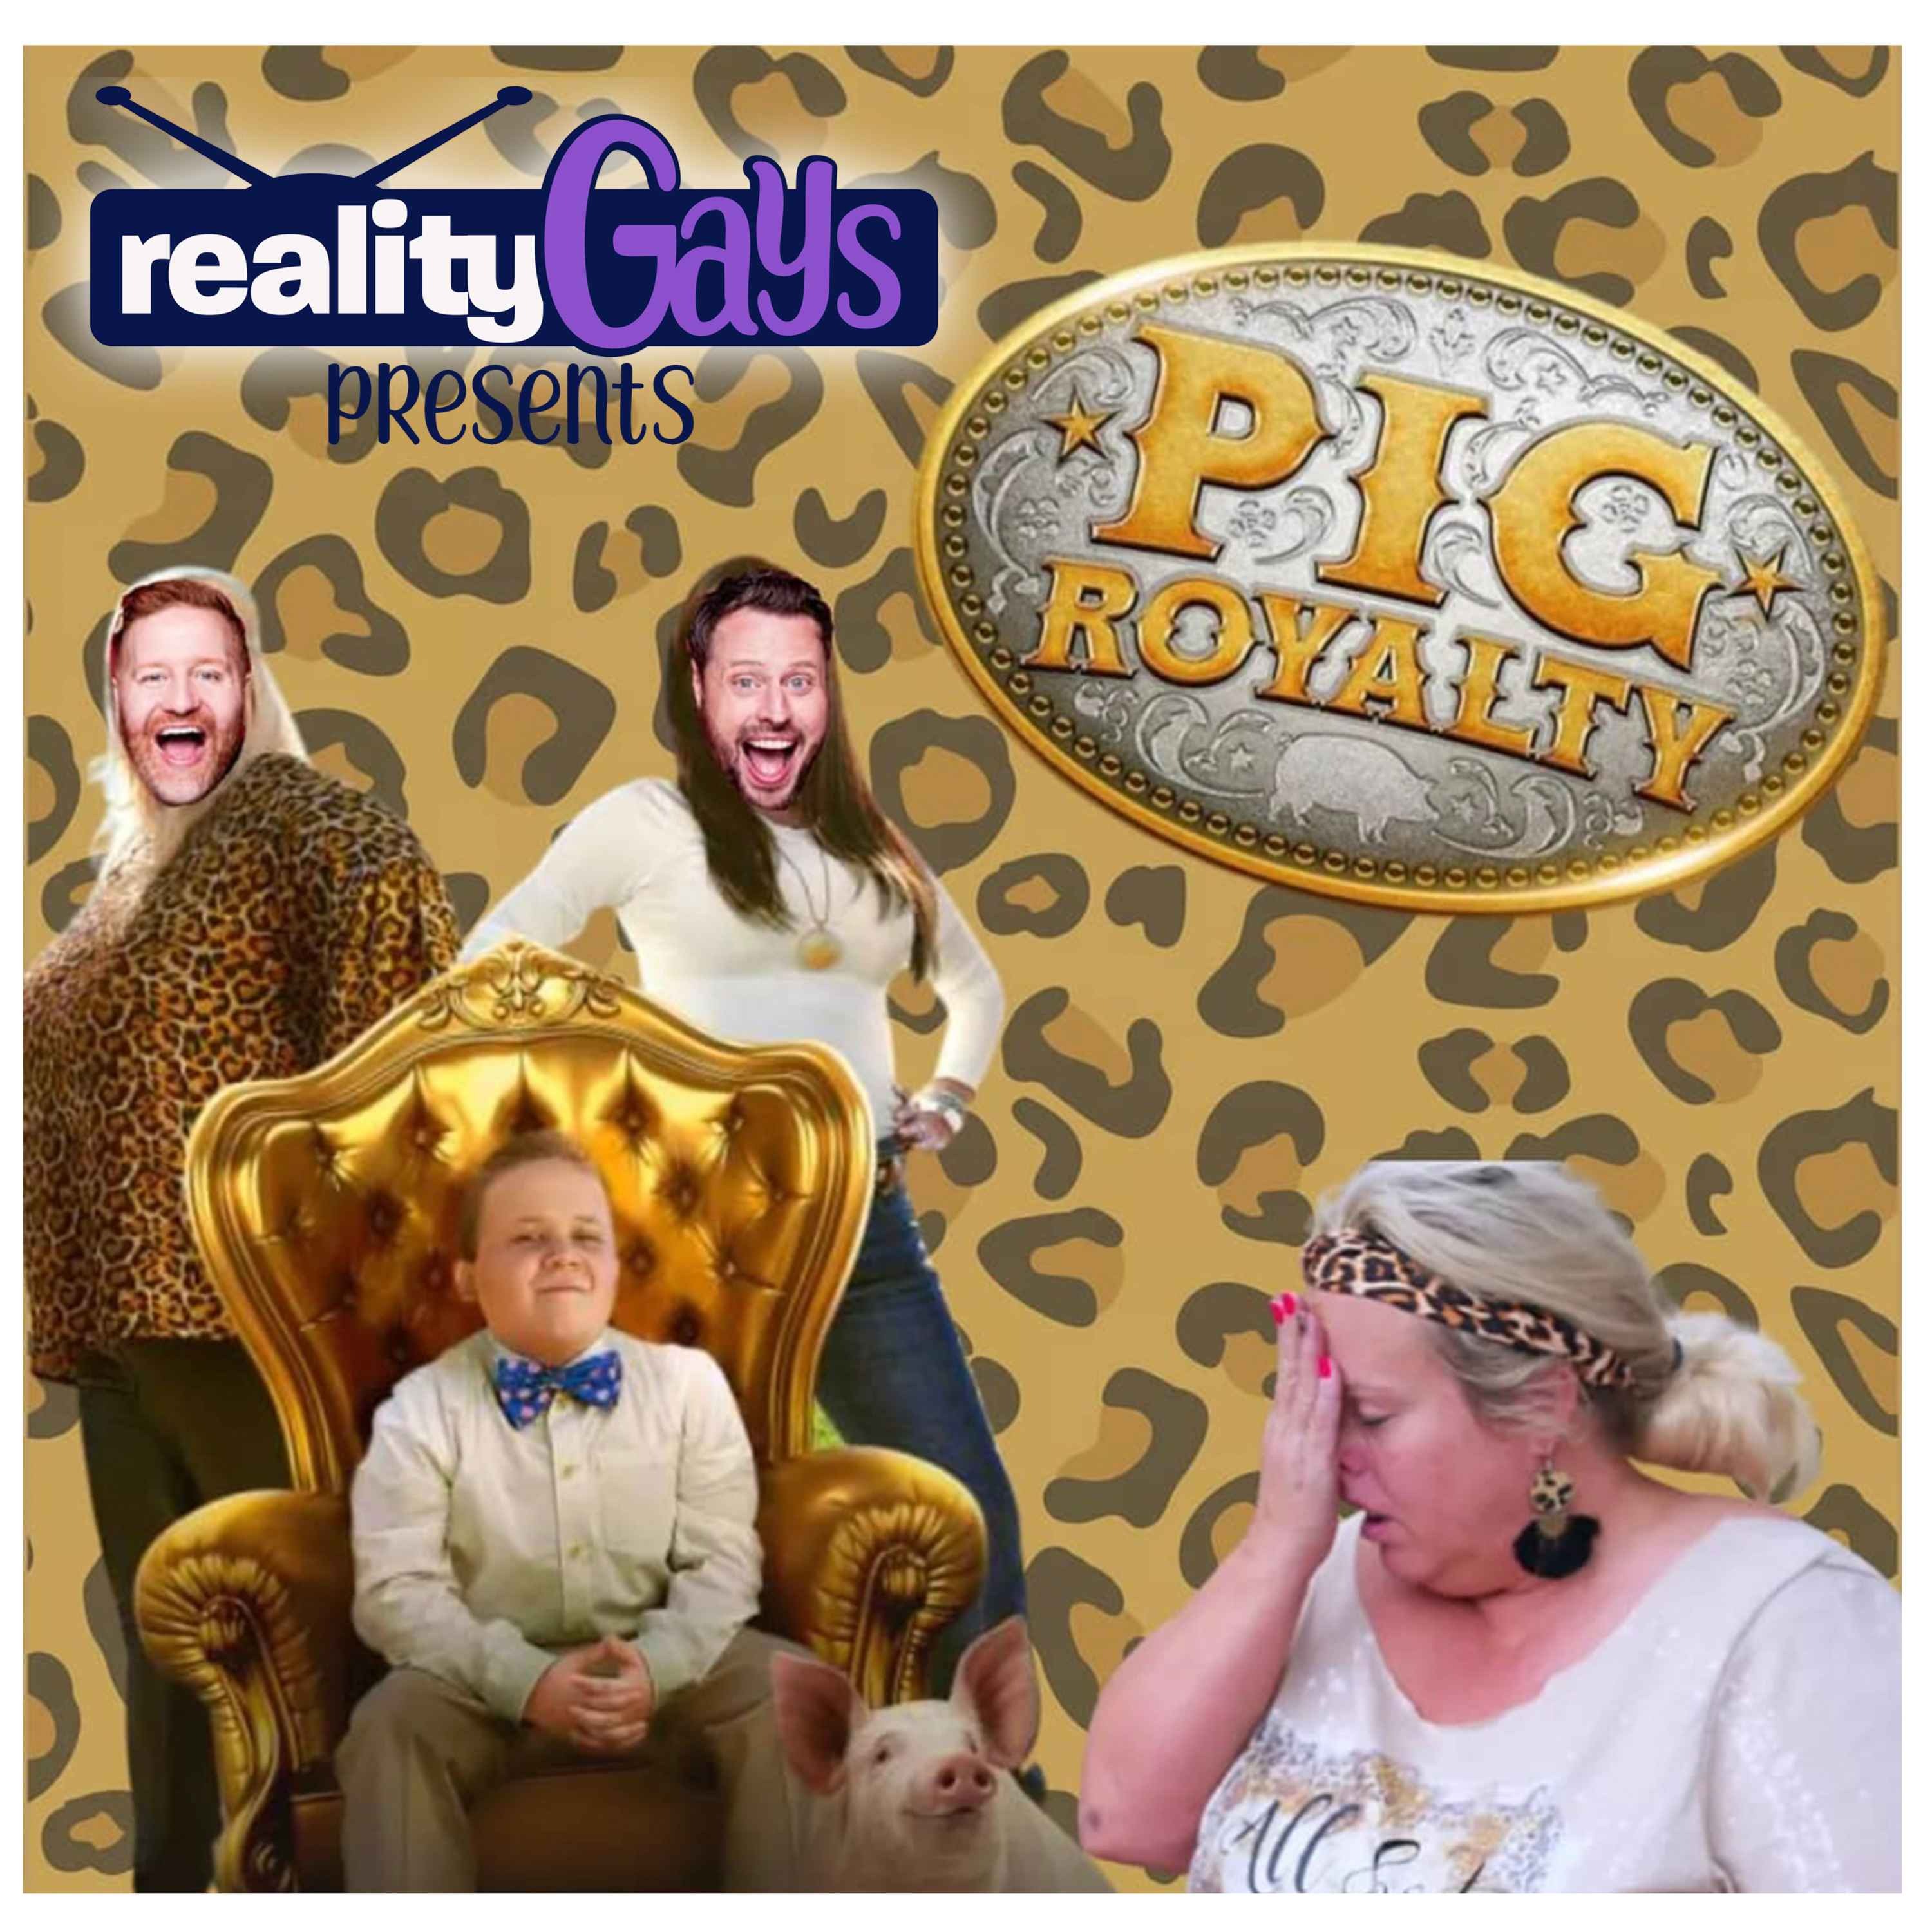 PIG ROYALTY: 0107 "It's All About the Kids" Image